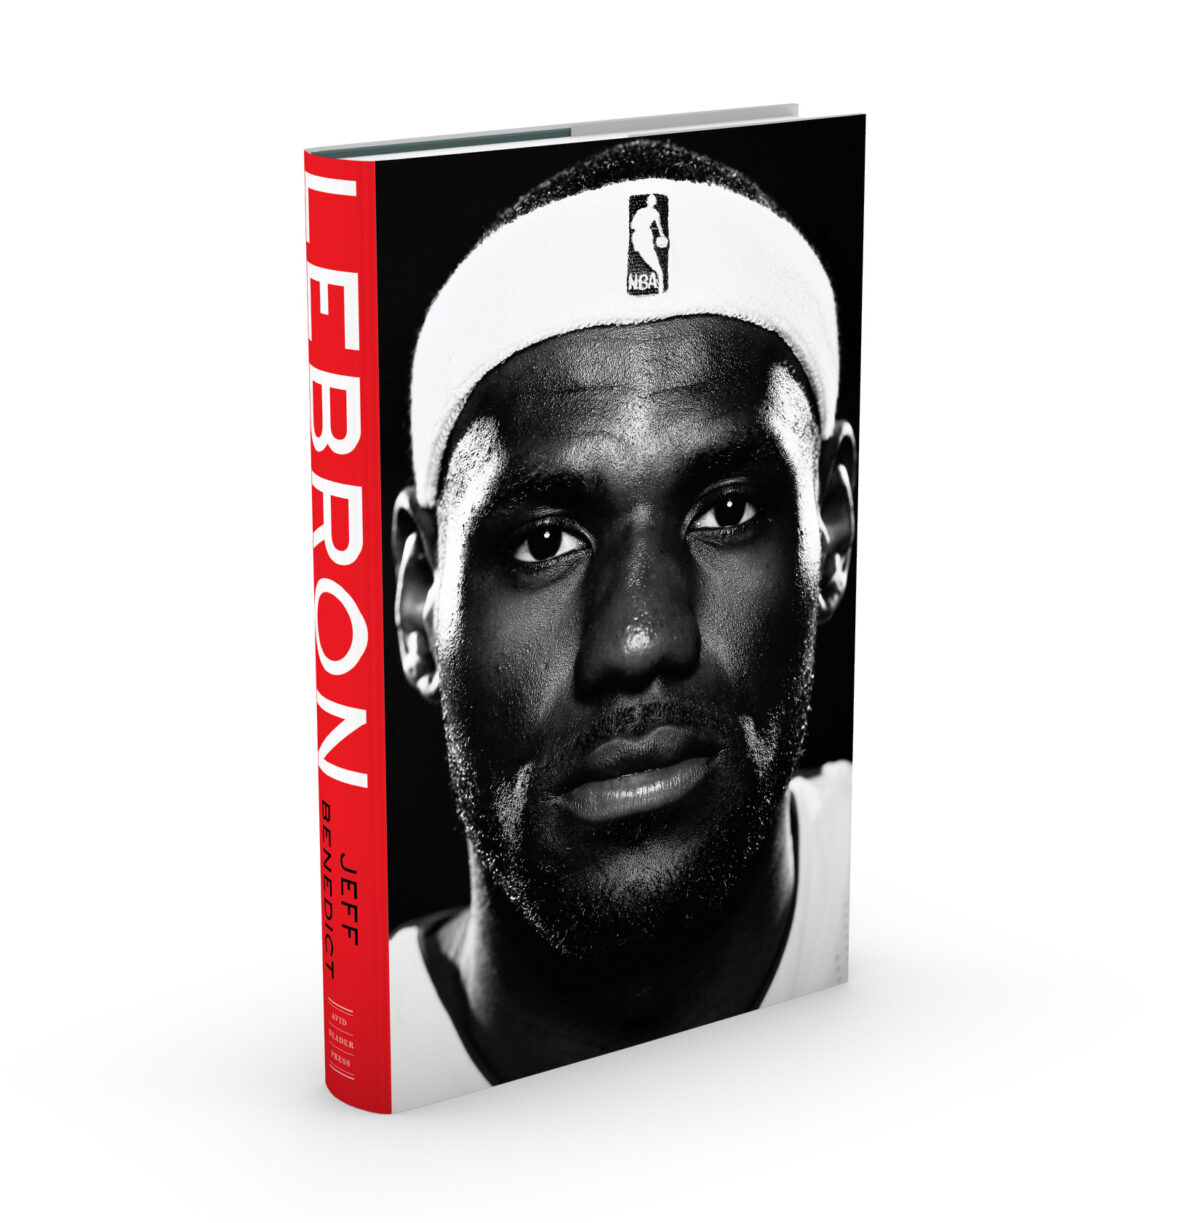 There’s a new LeBron James biography. We have an excerpt